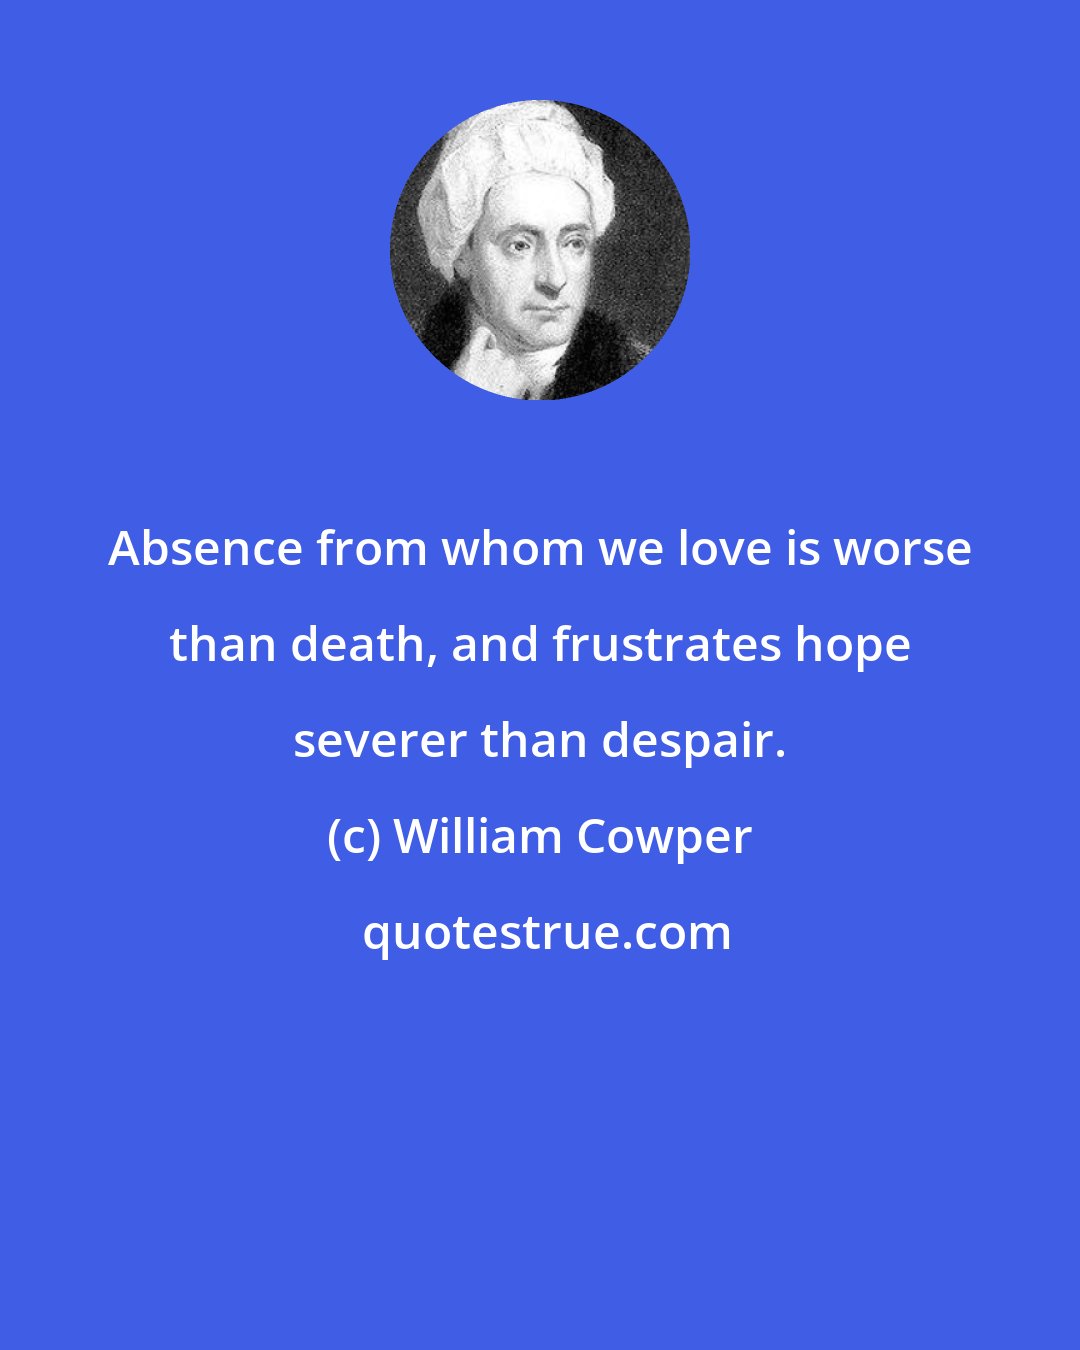 William Cowper: Absence from whom we love is worse than death, and frustrates hope severer than despair.